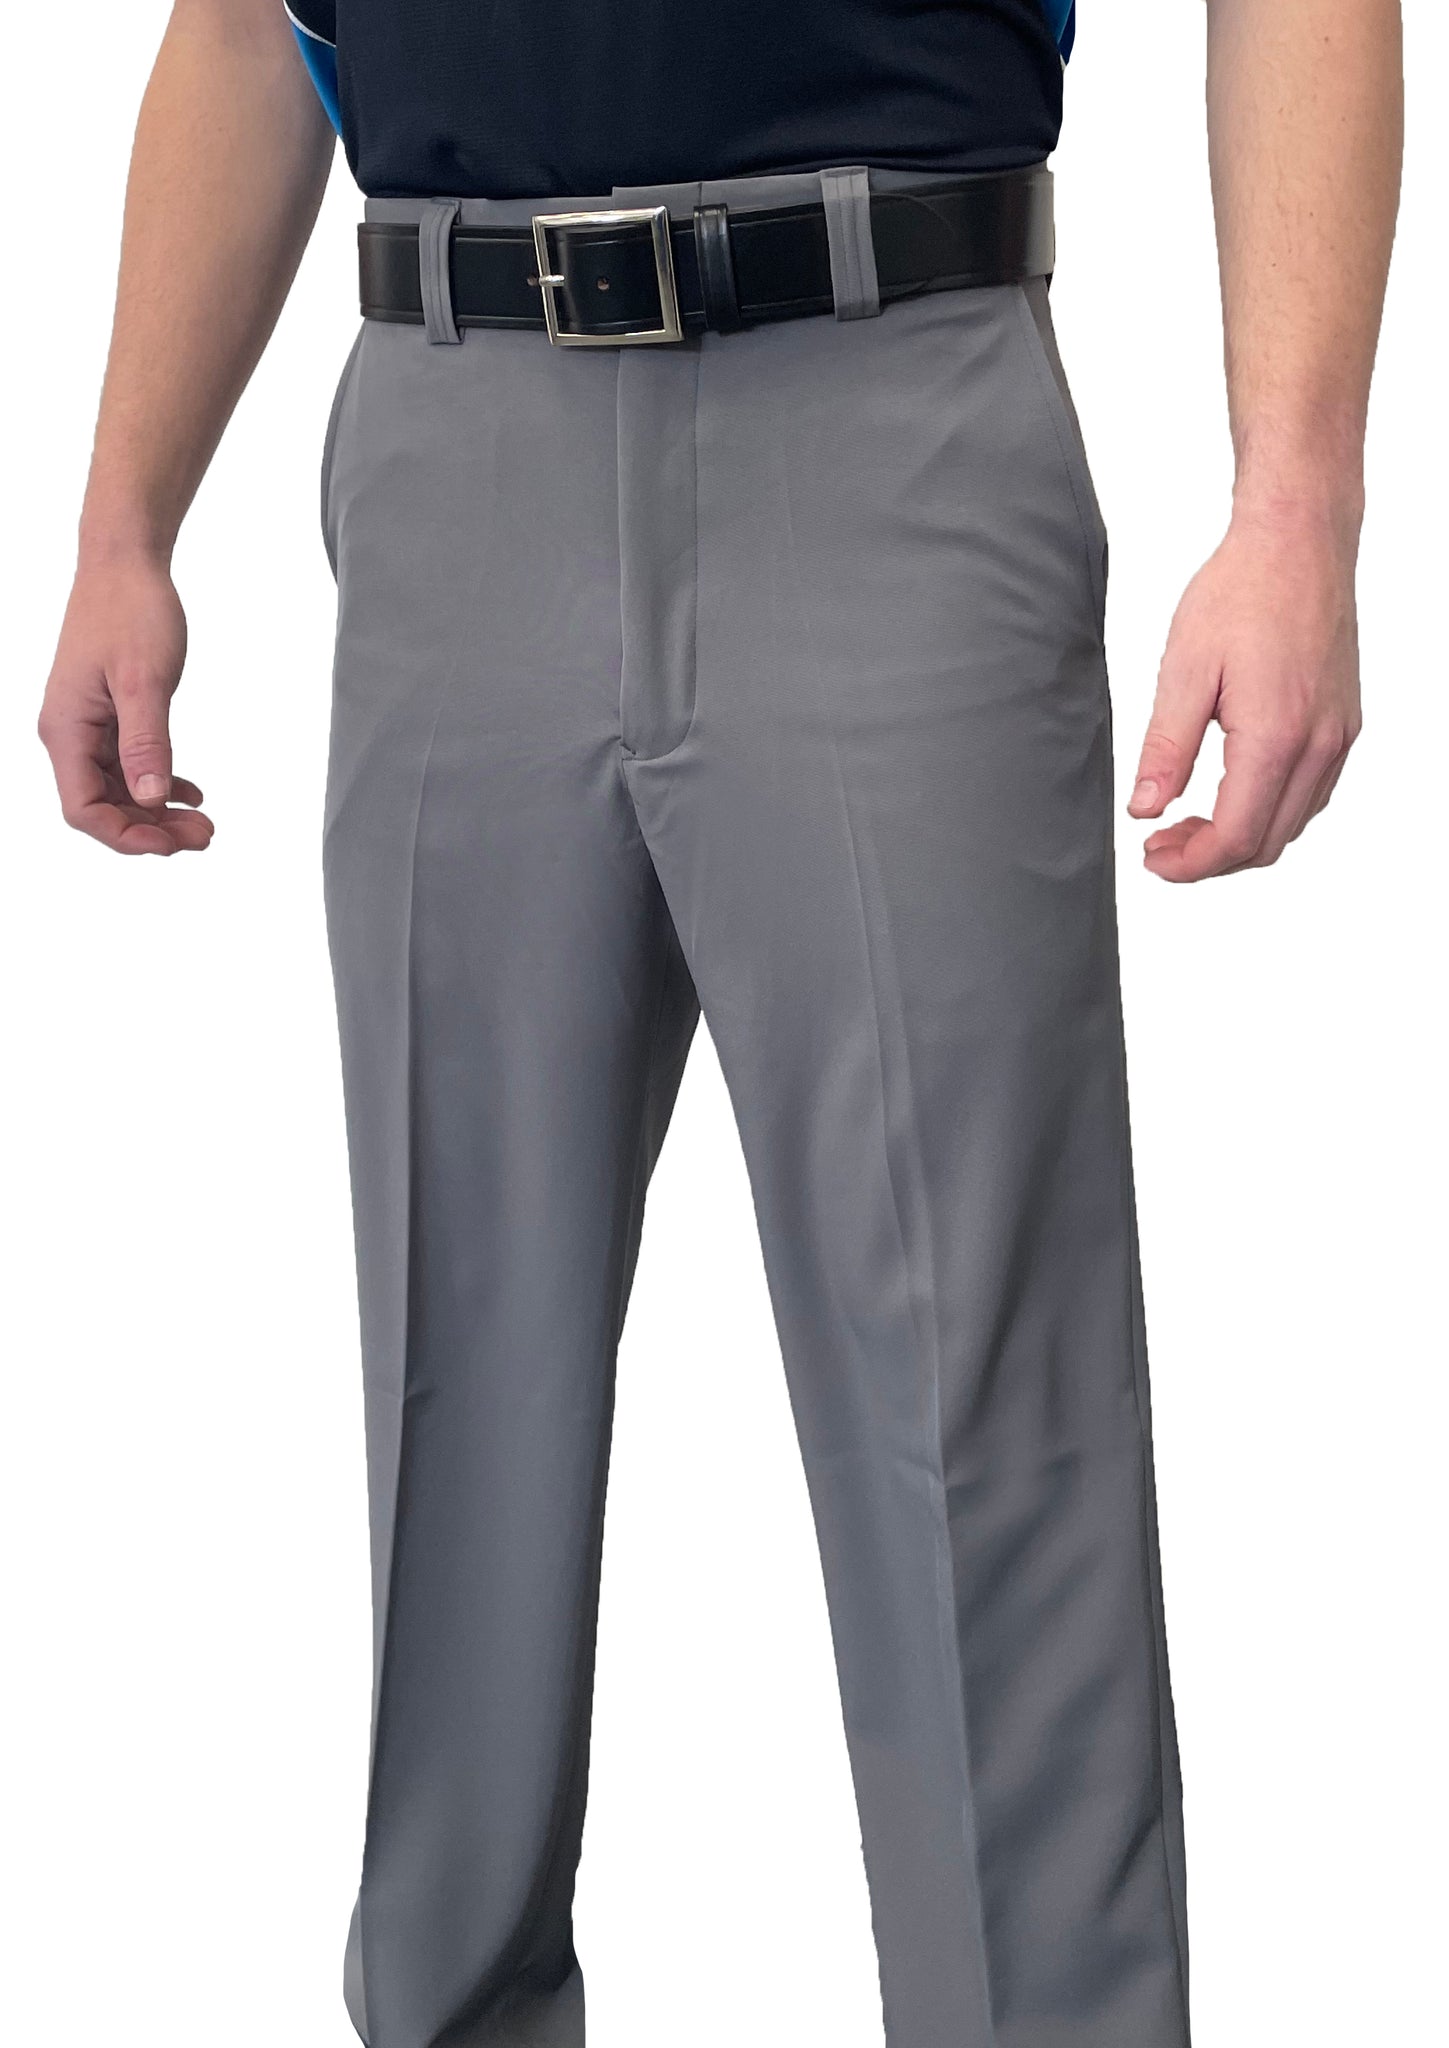 BBS357HG - "NEW" Men's Smitty "4-Way Stretch" FLAT FRONT COMBO PANTS with SLASH POCKETS "EXPANDER WAISTBAND"- HEATHER GREY